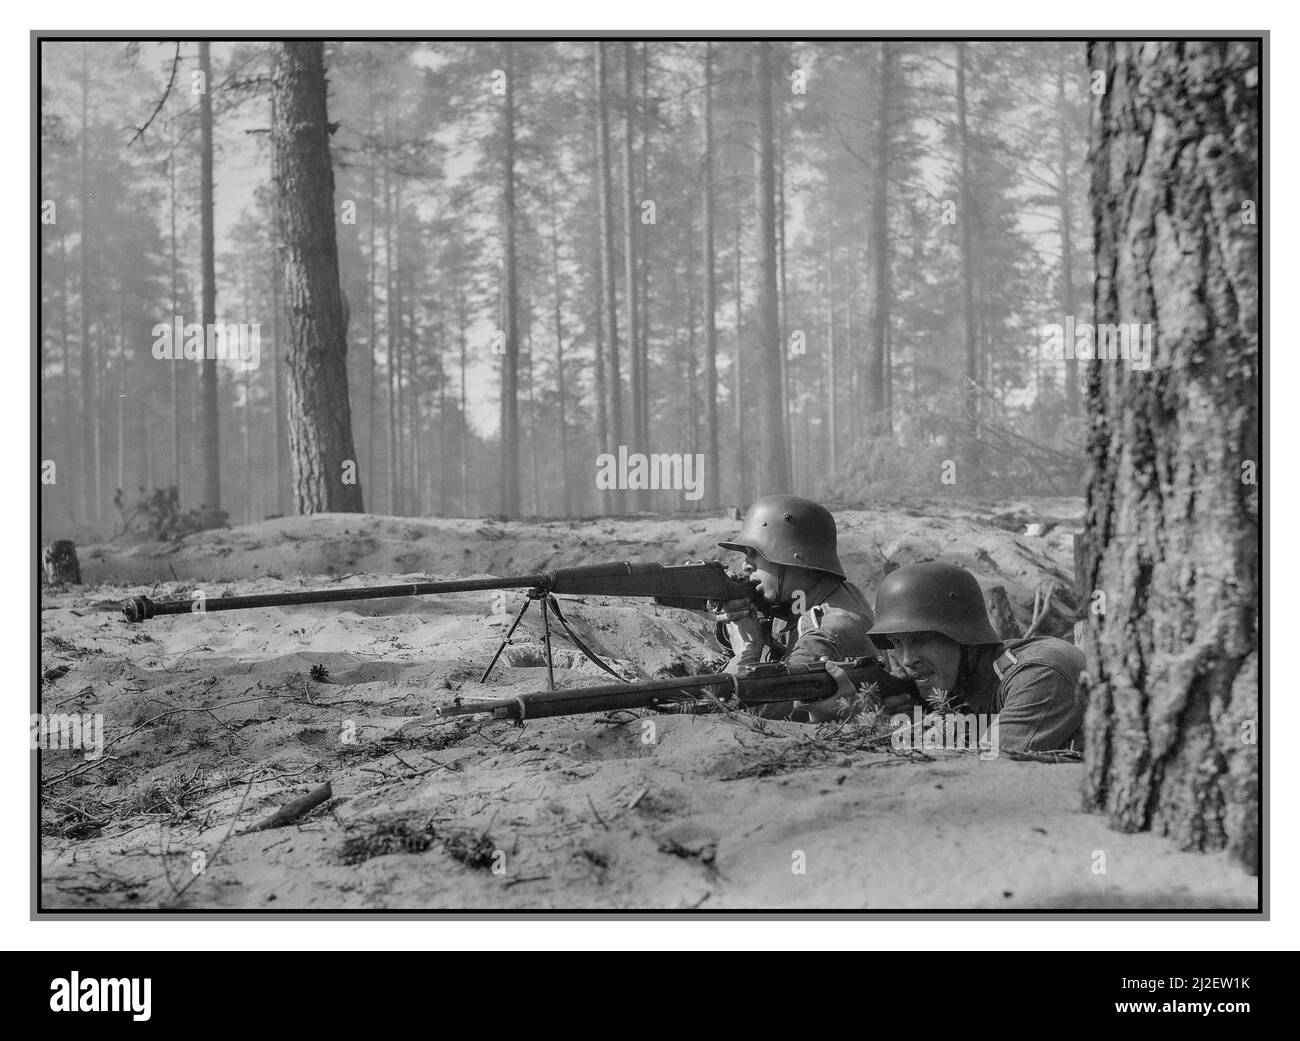 WW2 Finland Finnish AT-Rifle team with Wz. 35 anti-tank rifle. 1 July 1942 fighting the Russian advance into Finland during the Continuation War The Continuation War, also known as the Second Soviet-Finnish War, was a conflict fought by Finland and Nazi Germany against the Soviet Union from 1941 to 1944, as part of World War II. In Soviet historiography, the war was called the Finnish Front of the Great Patriotic War. Stock Photo